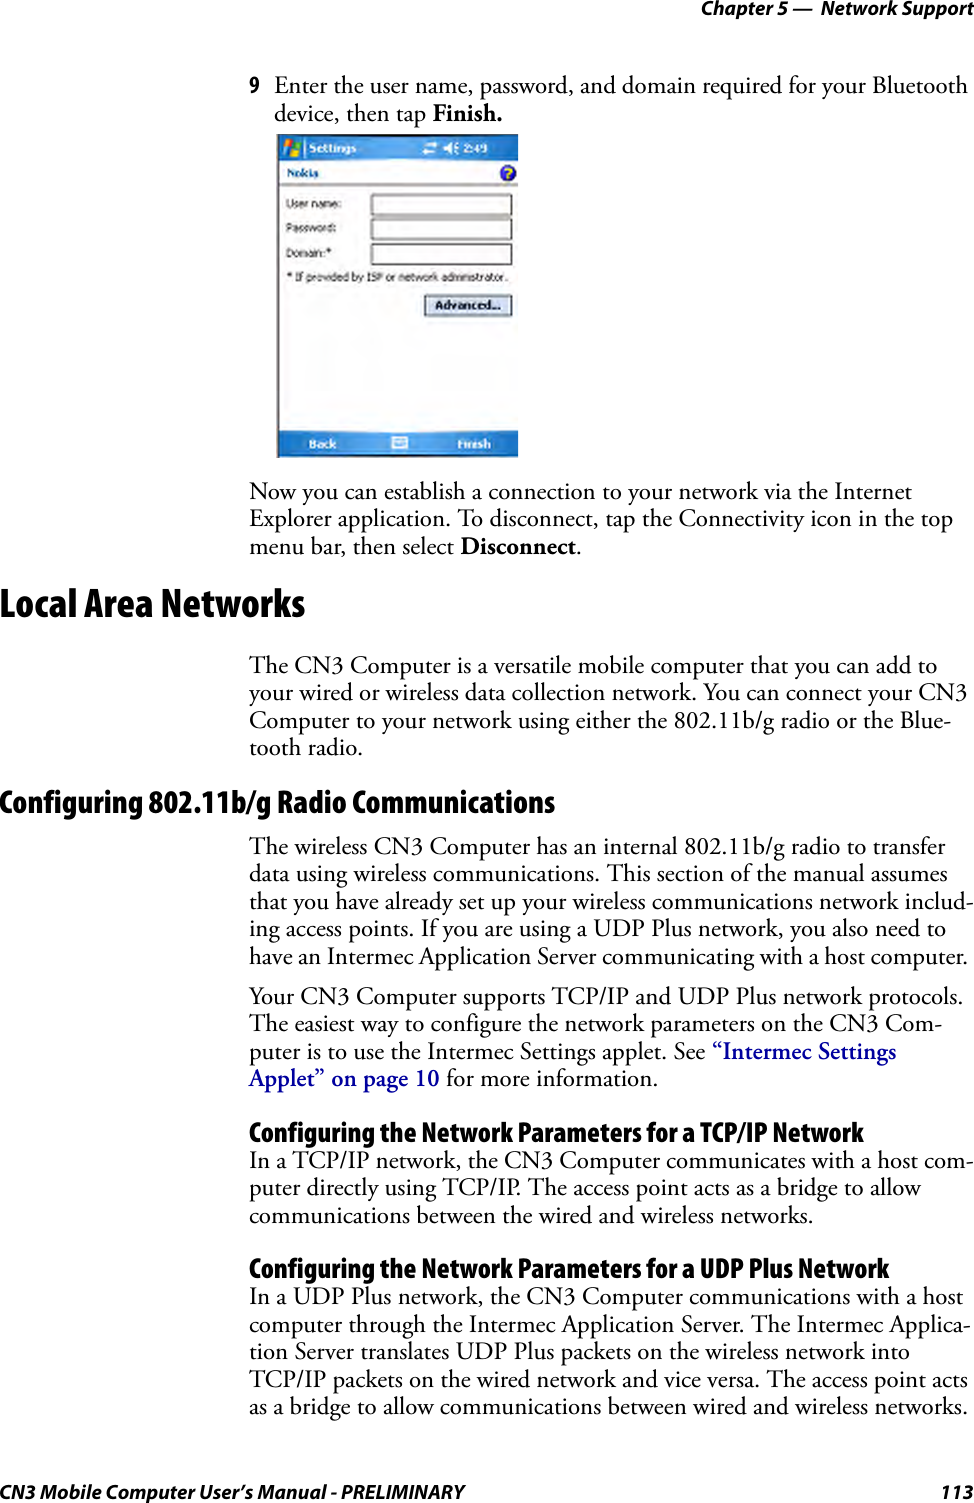 Chapter 5 —  Network SupportCN3 Mobile Computer User’s Manual - PRELIMINARY 1139Enter the user name, password, and domain required for your Bluetooth device, then tap Finish.Now you can establish a connection to your network via the Internet Explorer application. To disconnect, tap the Connectivity icon in the top menu bar, then select Disconnect.Local Area NetworksThe CN3 Computer is a versatile mobile computer that you can add to your wired or wireless data collection network. You can connect your CN3 Computer to your network using either the 802.11b/g radio or the Blue-tooth radio.Configuring 802.11b/g Radio CommunicationsThe wireless CN3 Computer has an internal 802.11b/g radio to transfer data using wireless communications. This section of the manual assumes that you have already set up your wireless communications network includ-ing access points. If you are using a UDP Plus network, you also need to have an Intermec Application Server communicating with a host computer. Your CN3 Computer supports TCP/IP and UDP Plus network protocols. The easiest way to configure the network parameters on the CN3 Com-puter is to use the Intermec Settings applet. See “Intermec Settings Applet” on page 10 for more information.Configuring the Network Parameters for a TCP/IP NetworkIn a TCP/IP network, the CN3 Computer communicates with a host com-puter directly using TCP/IP. The access point acts as a bridge to allow communications between the wired and wireless networks.Configuring the Network Parameters for a UDP Plus NetworkIn a UDP Plus network, the CN3 Computer communications with a host computer through the Intermec Application Server. The Intermec Applica-tion Server translates UDP Plus packets on the wireless network into TCP/IP packets on the wired network and vice versa. The access point acts as a bridge to allow communications between wired and wireless networks.